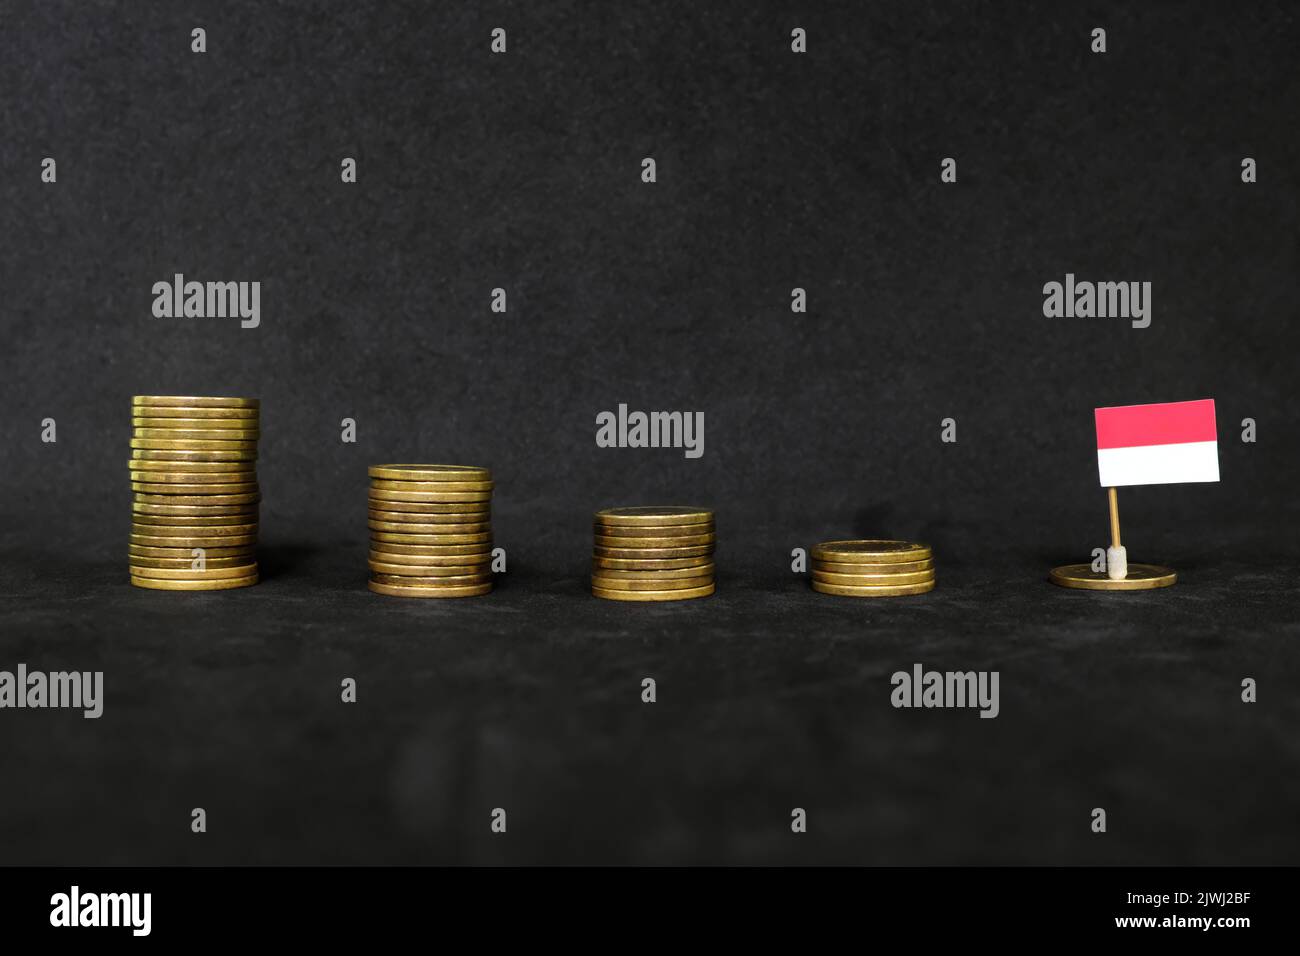 Indonesia economic recession, financial crisis and currency depreciation concept. Indonesian flag in decreasing stack of coins in dark black Stock Photo